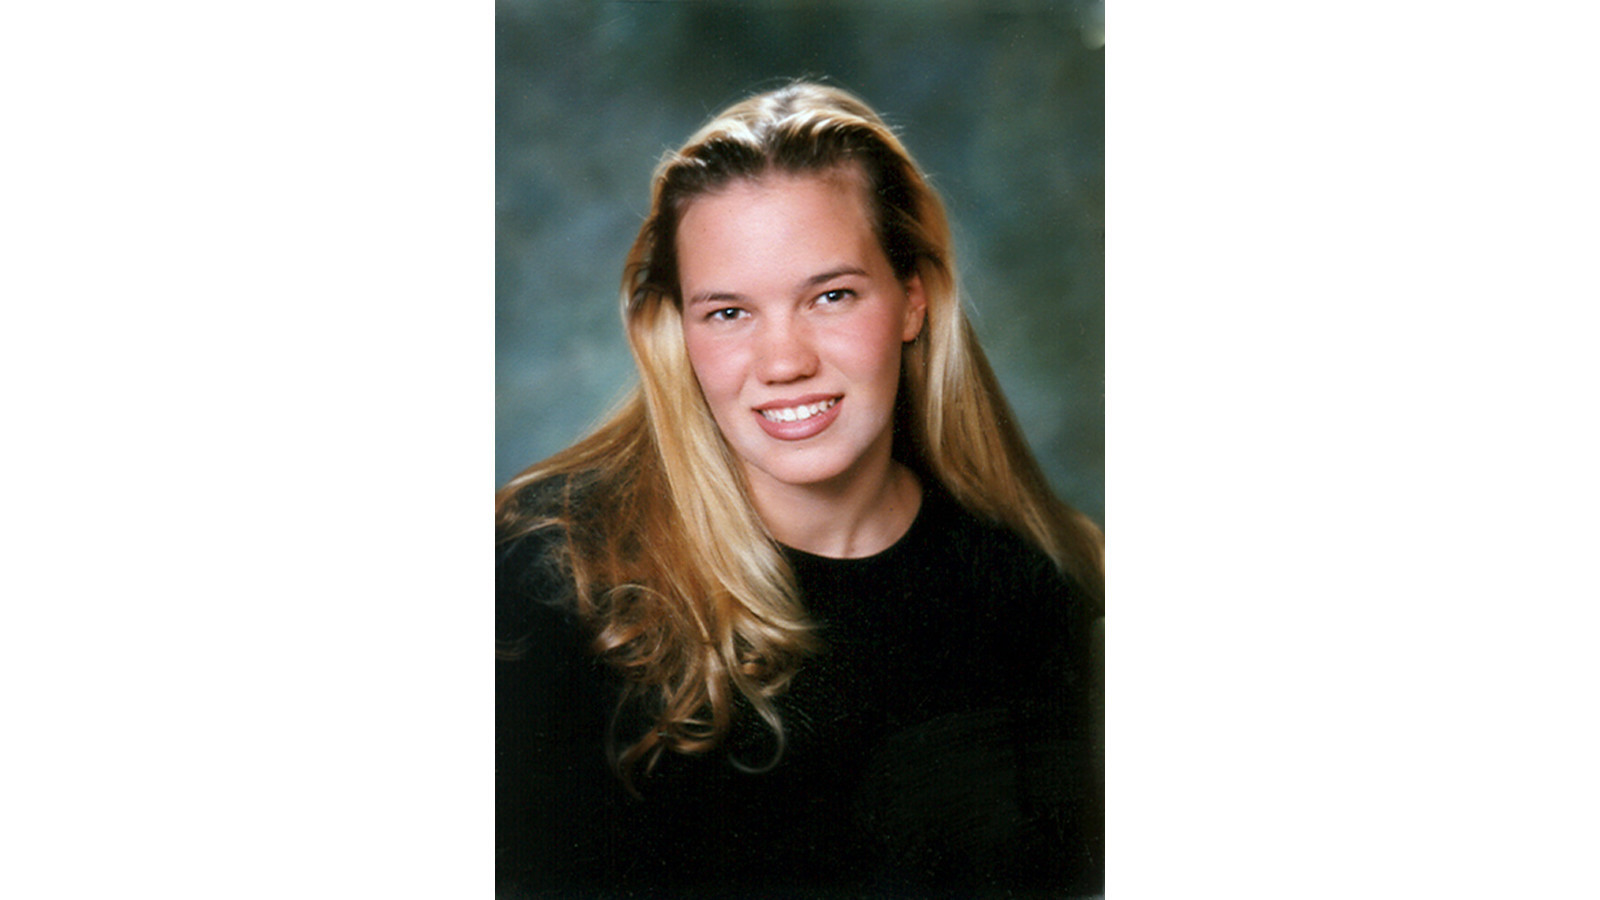 Cal Poly student Kristin Smart vanished 20 years ago. Now, authorities are digging the ...1600 x 900